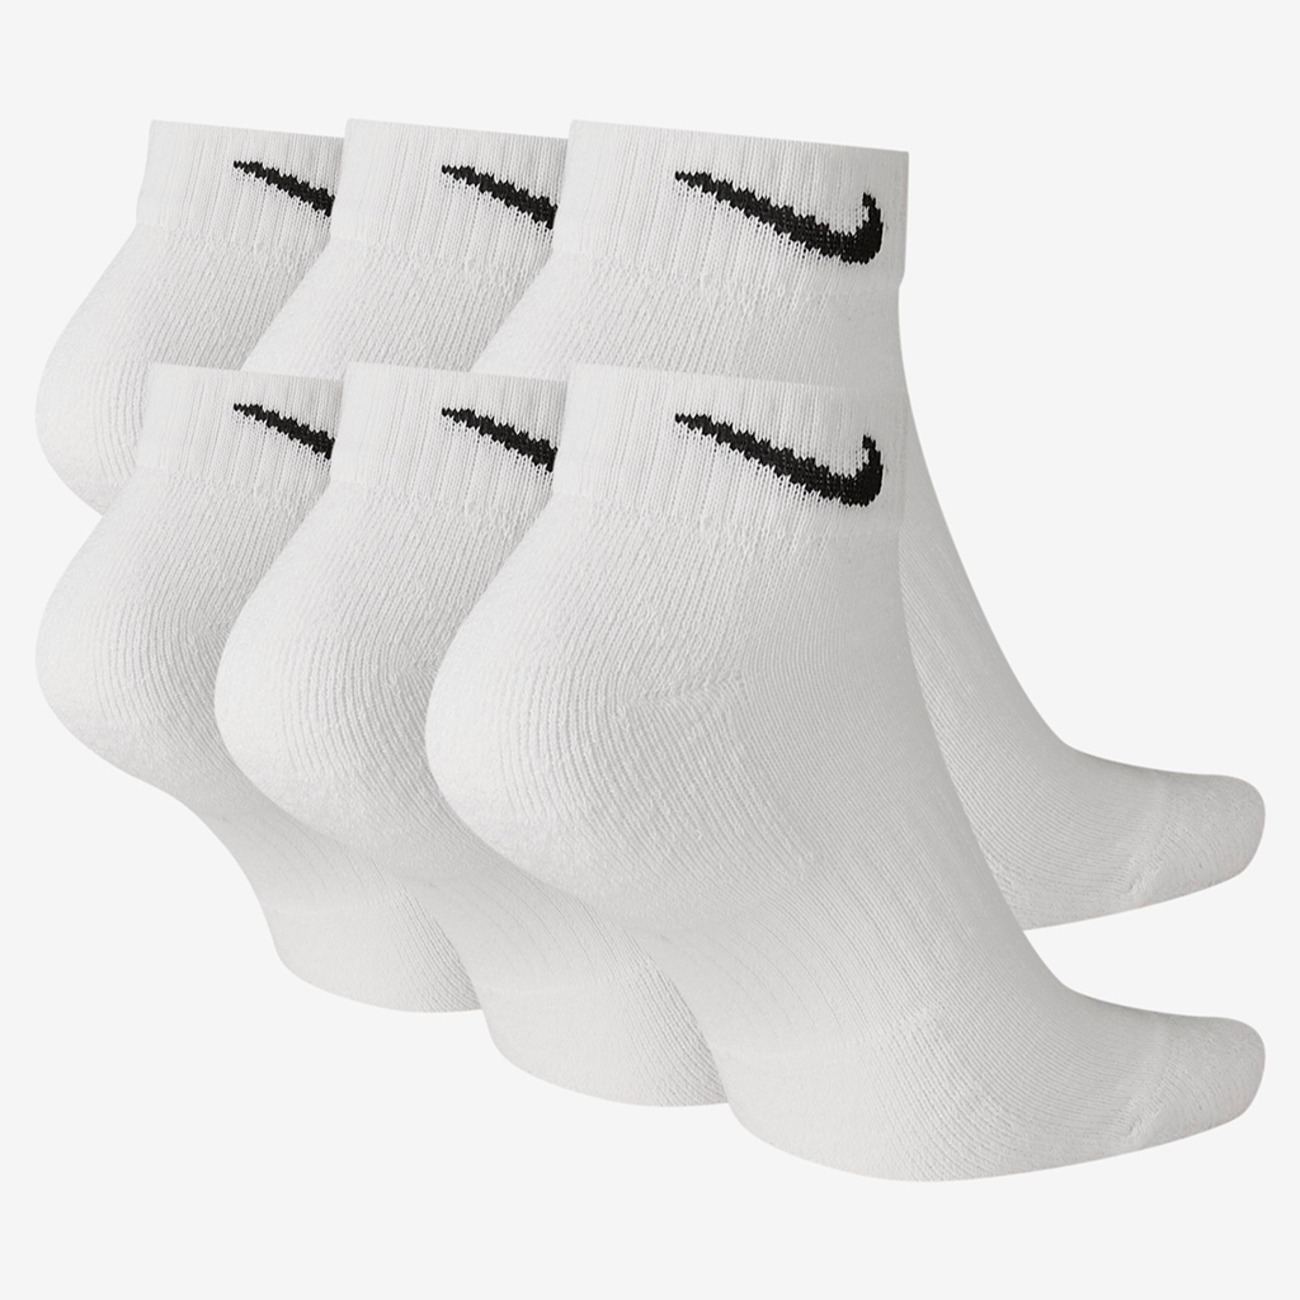 Meia Nike Everyday Cushioned (6 pares) Unissex - Foto 2